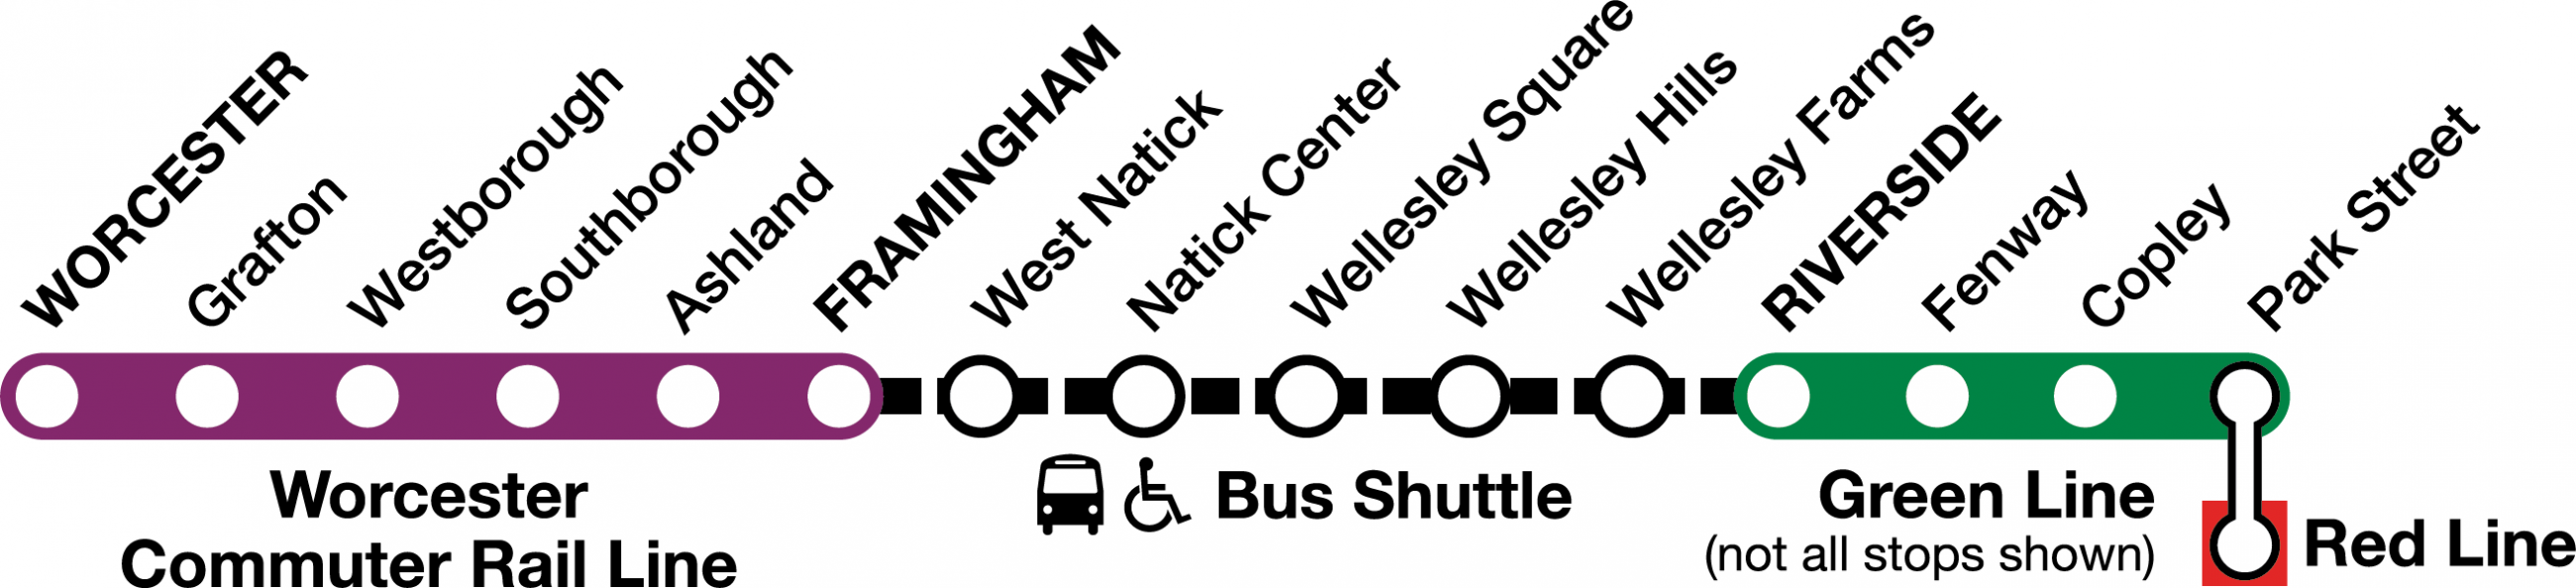 For weekends June 23 to July 29, bus shuttles replace train service between Framingham and South Station.